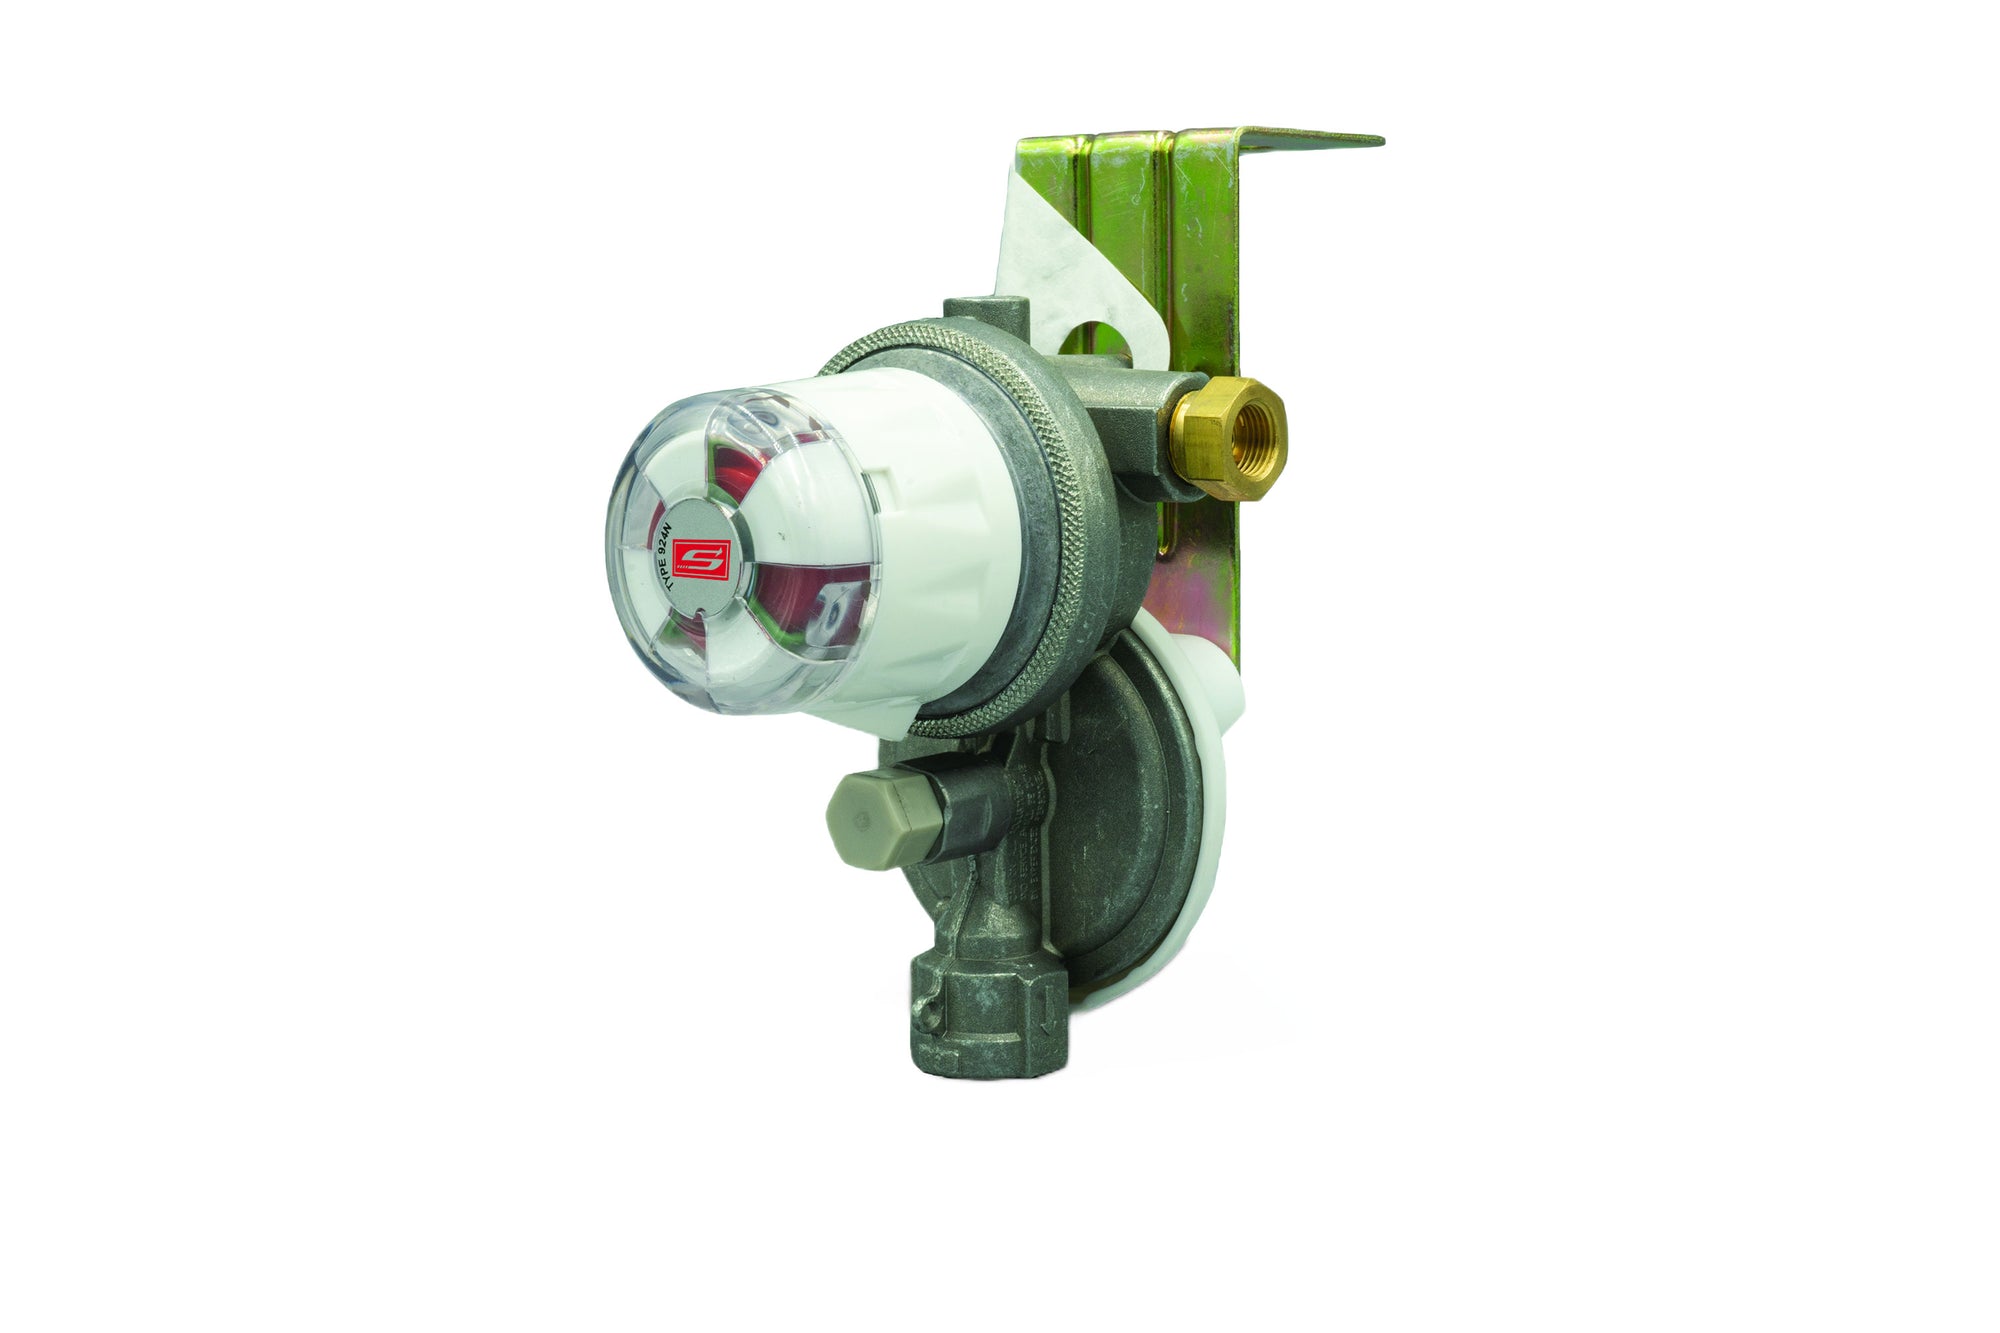 Suburban LP-R924 Low Capacity, Automatic Changeover Regulator -160,000 BTU/hr, Inlet: 1/4" Inverted Flare, Outlet: 3/8" FNPT